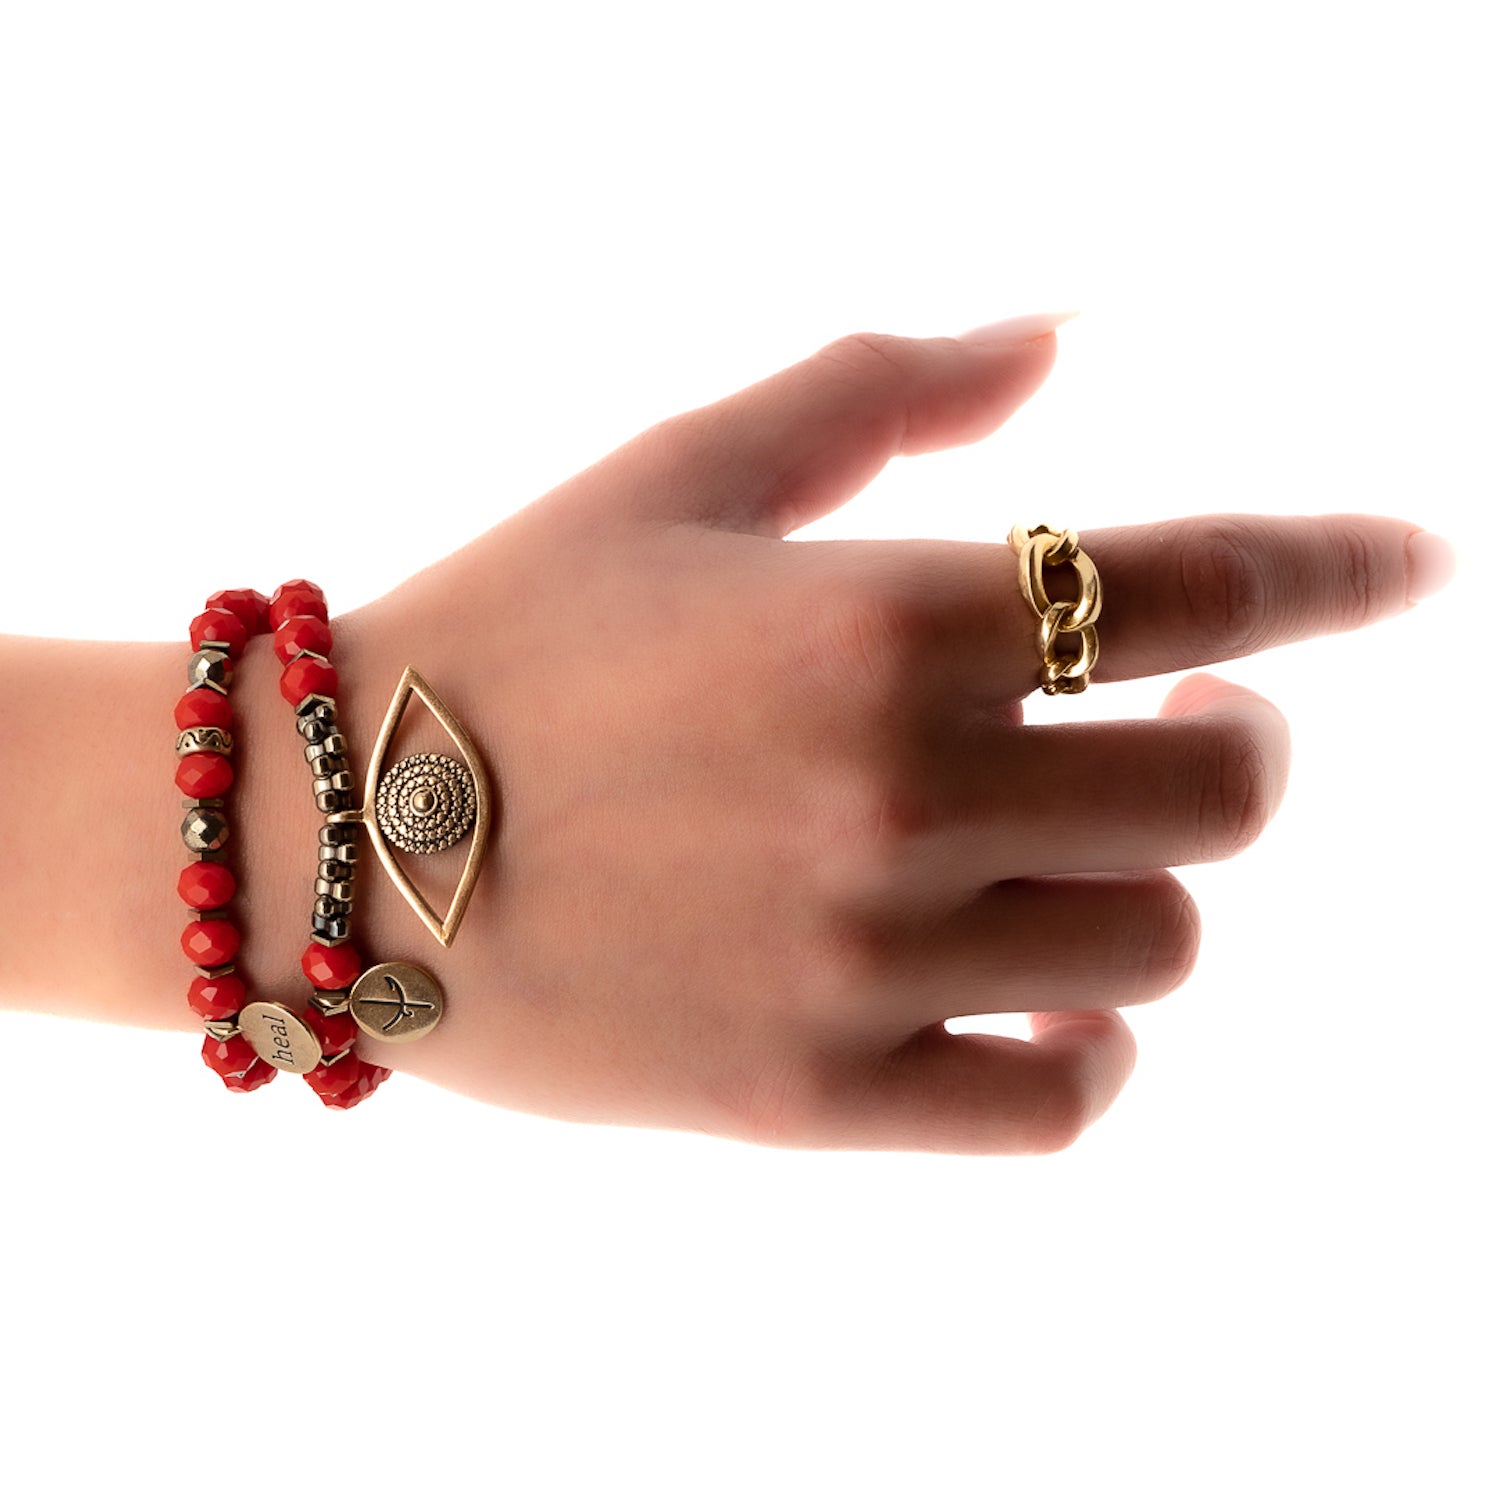 Hand Model Wearing Christmas Evil Eye Bracelet: See how this stunning bracelet looks on a hand, radiating its positive energy and stylish design.